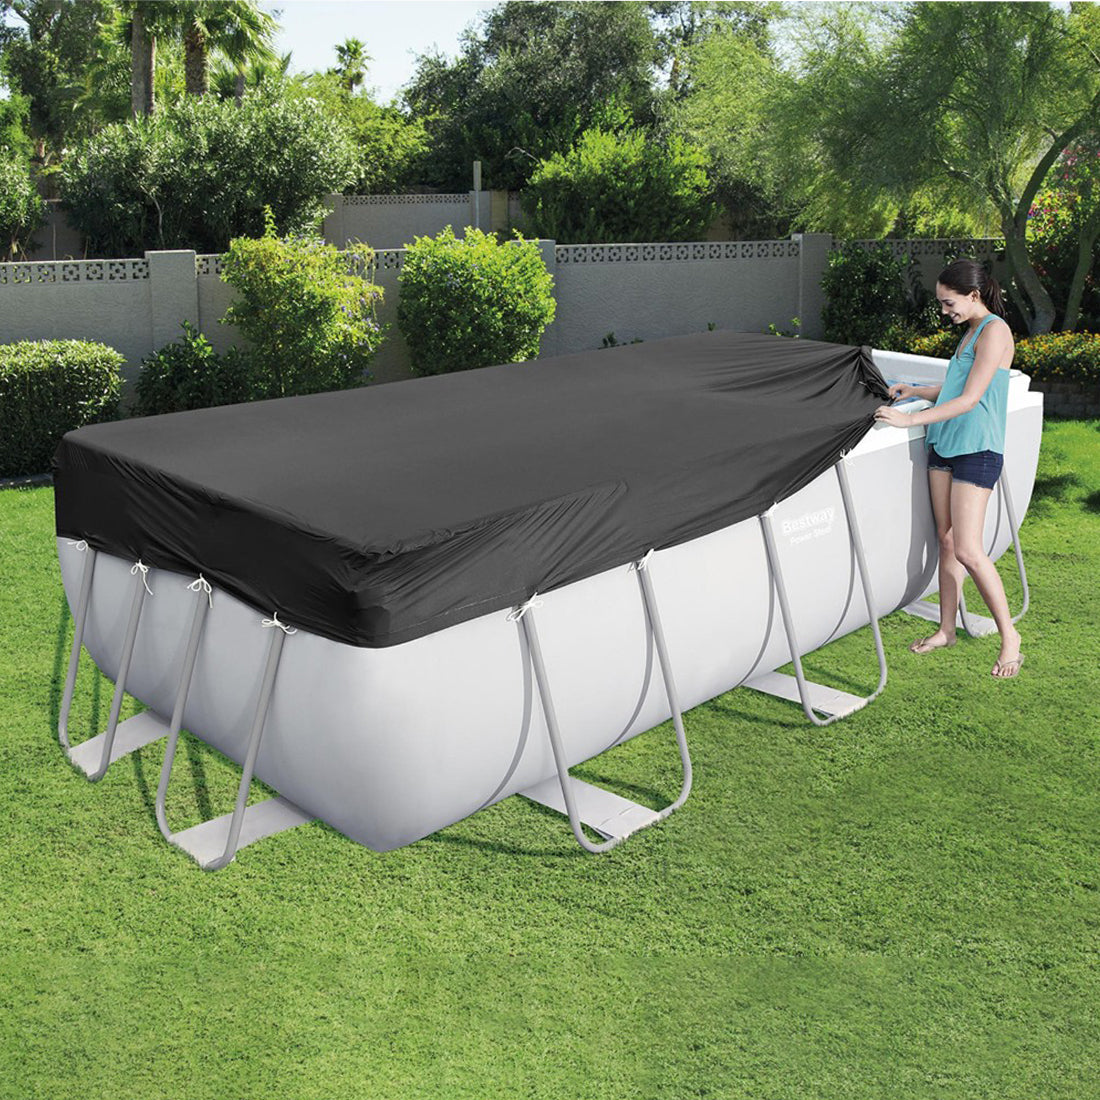 Bestway Swimming Pool Cover 156" x 73" - Fits 56251 56241 56244